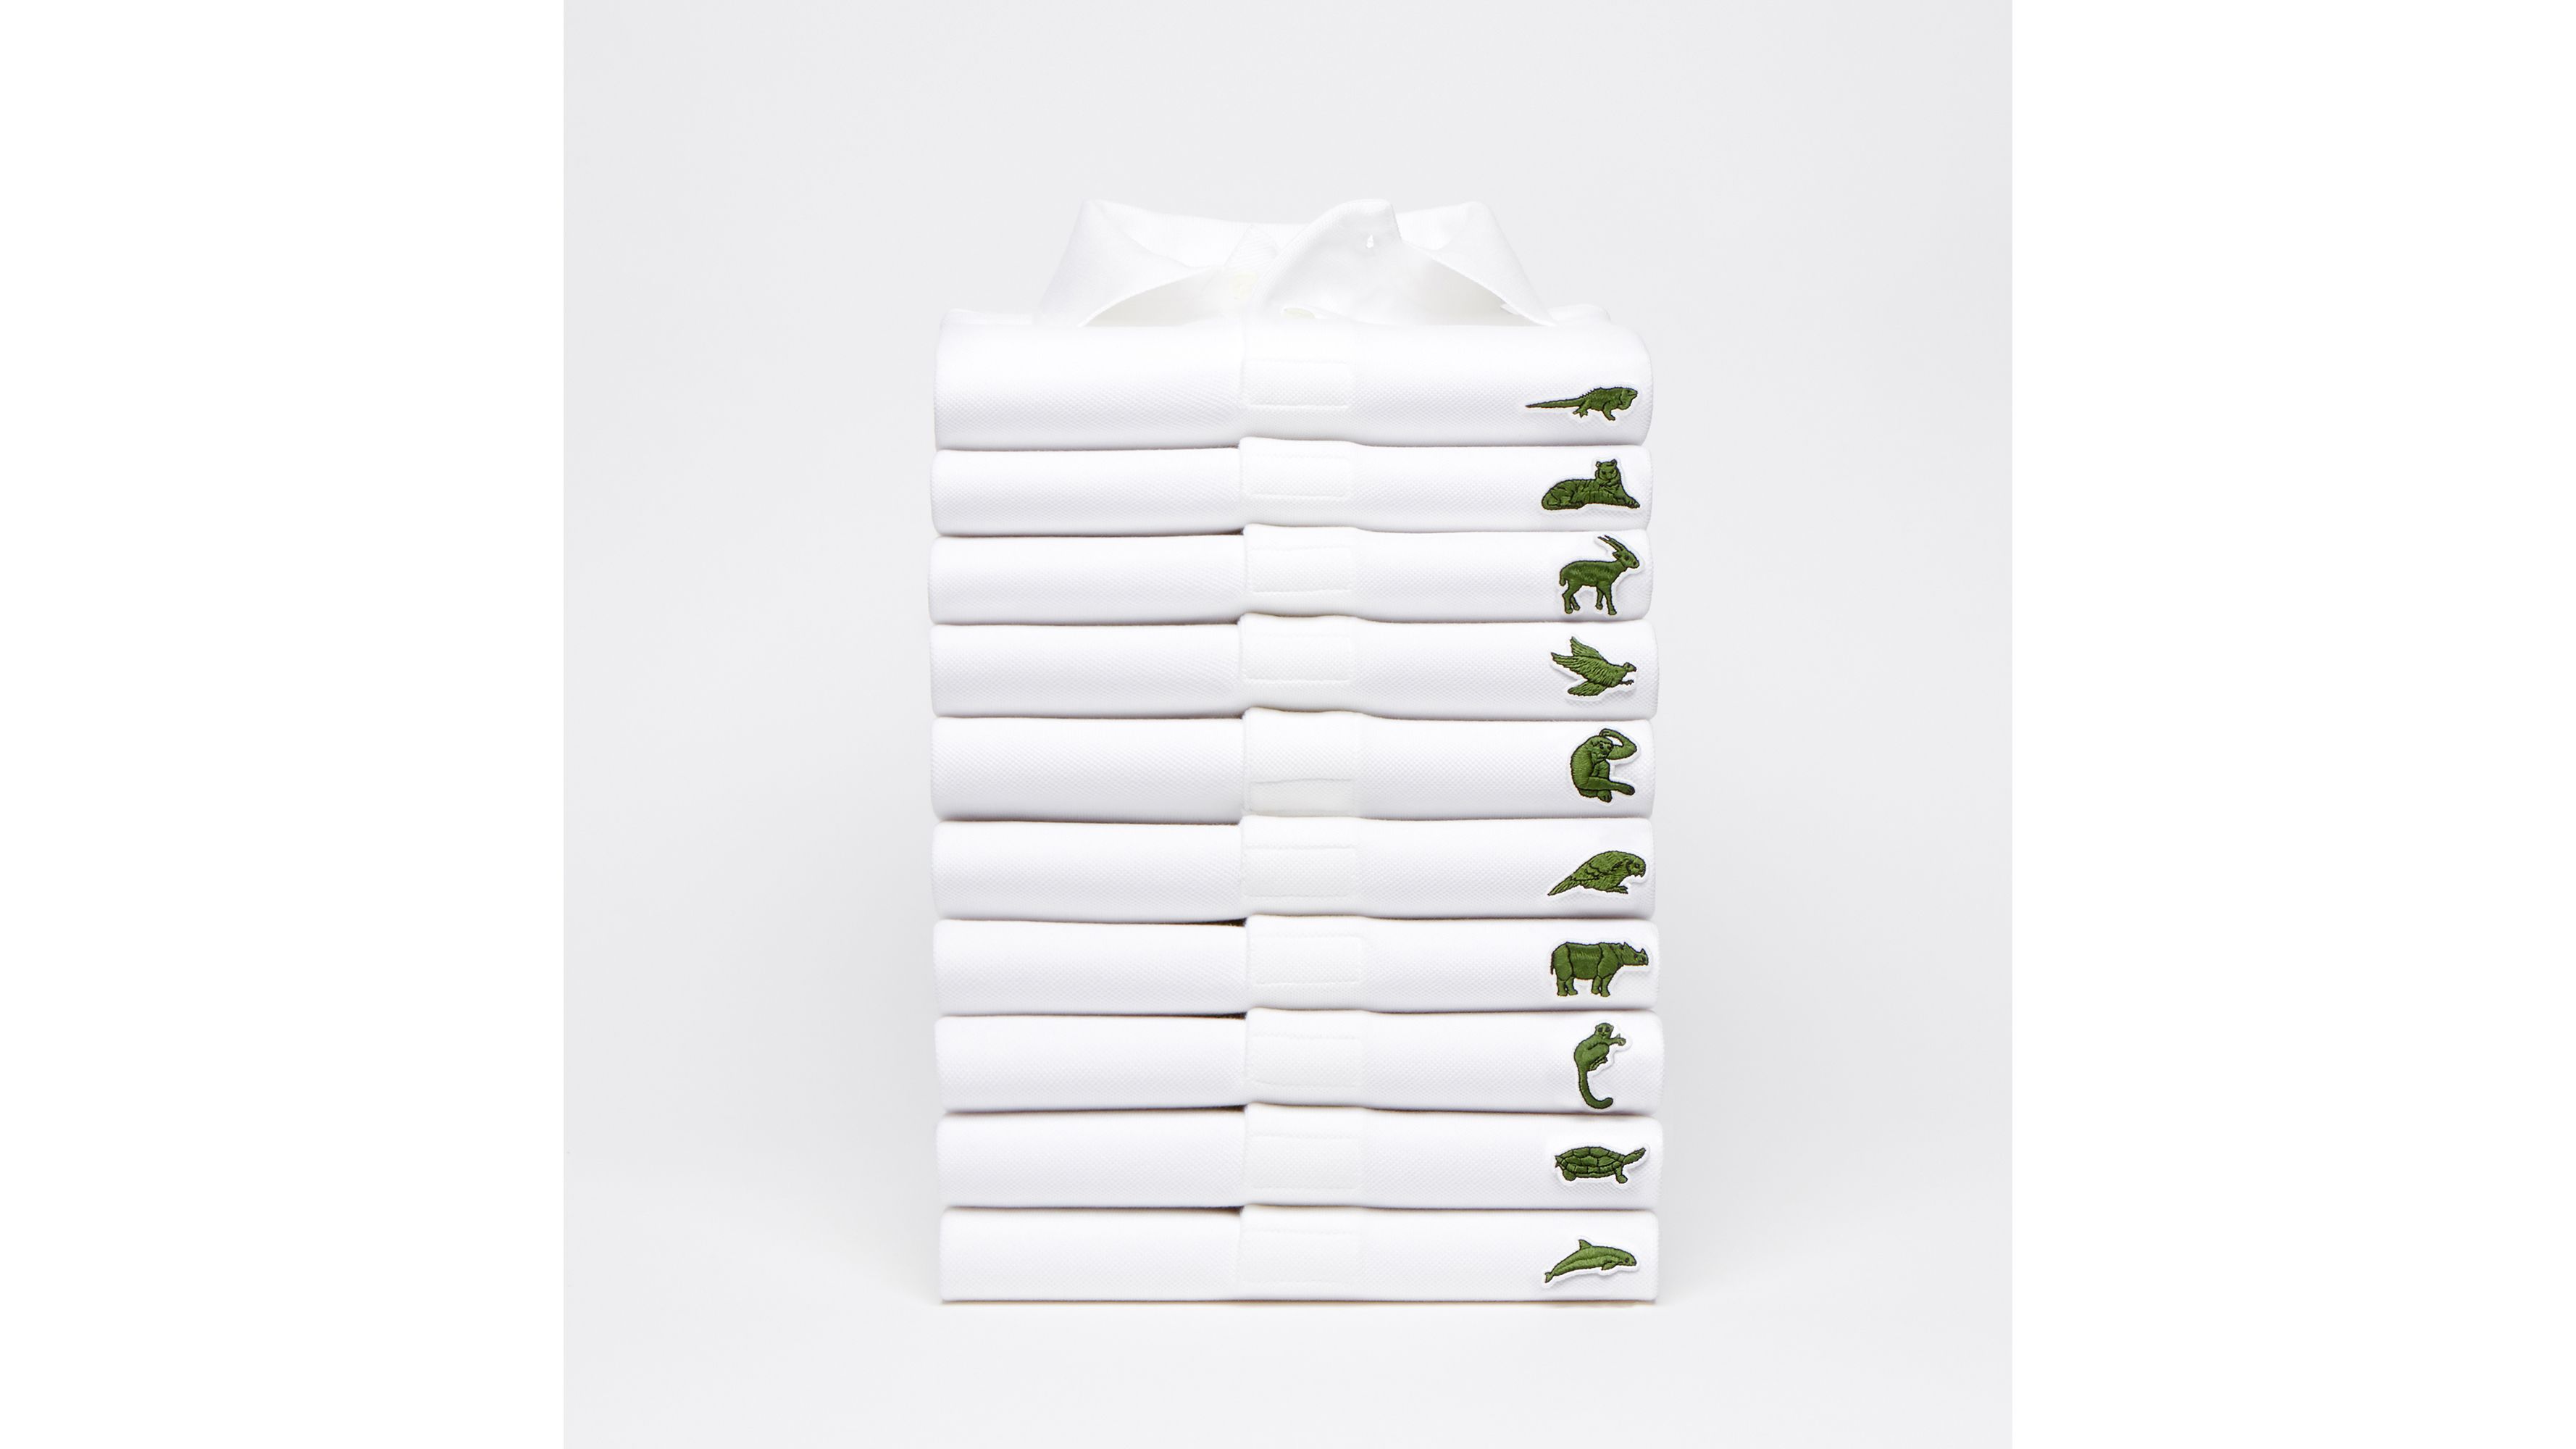 Lacoste temporarily changes to raise awareness for endangered species | CNN